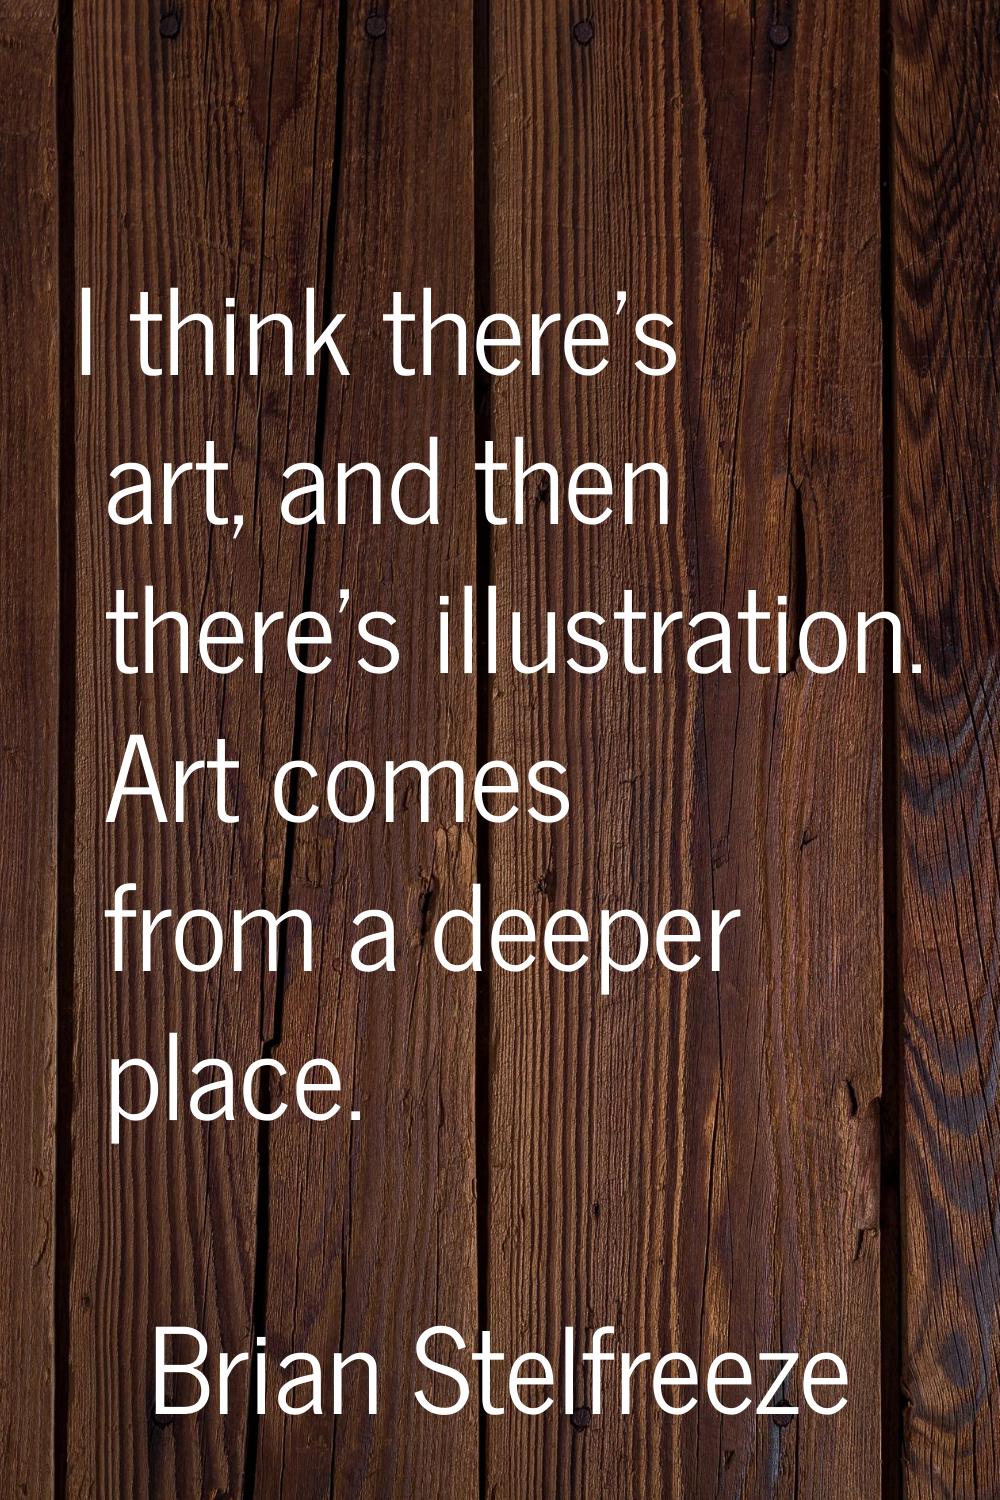 I think there's art, and then there's illustration. Art comes from a deeper place.